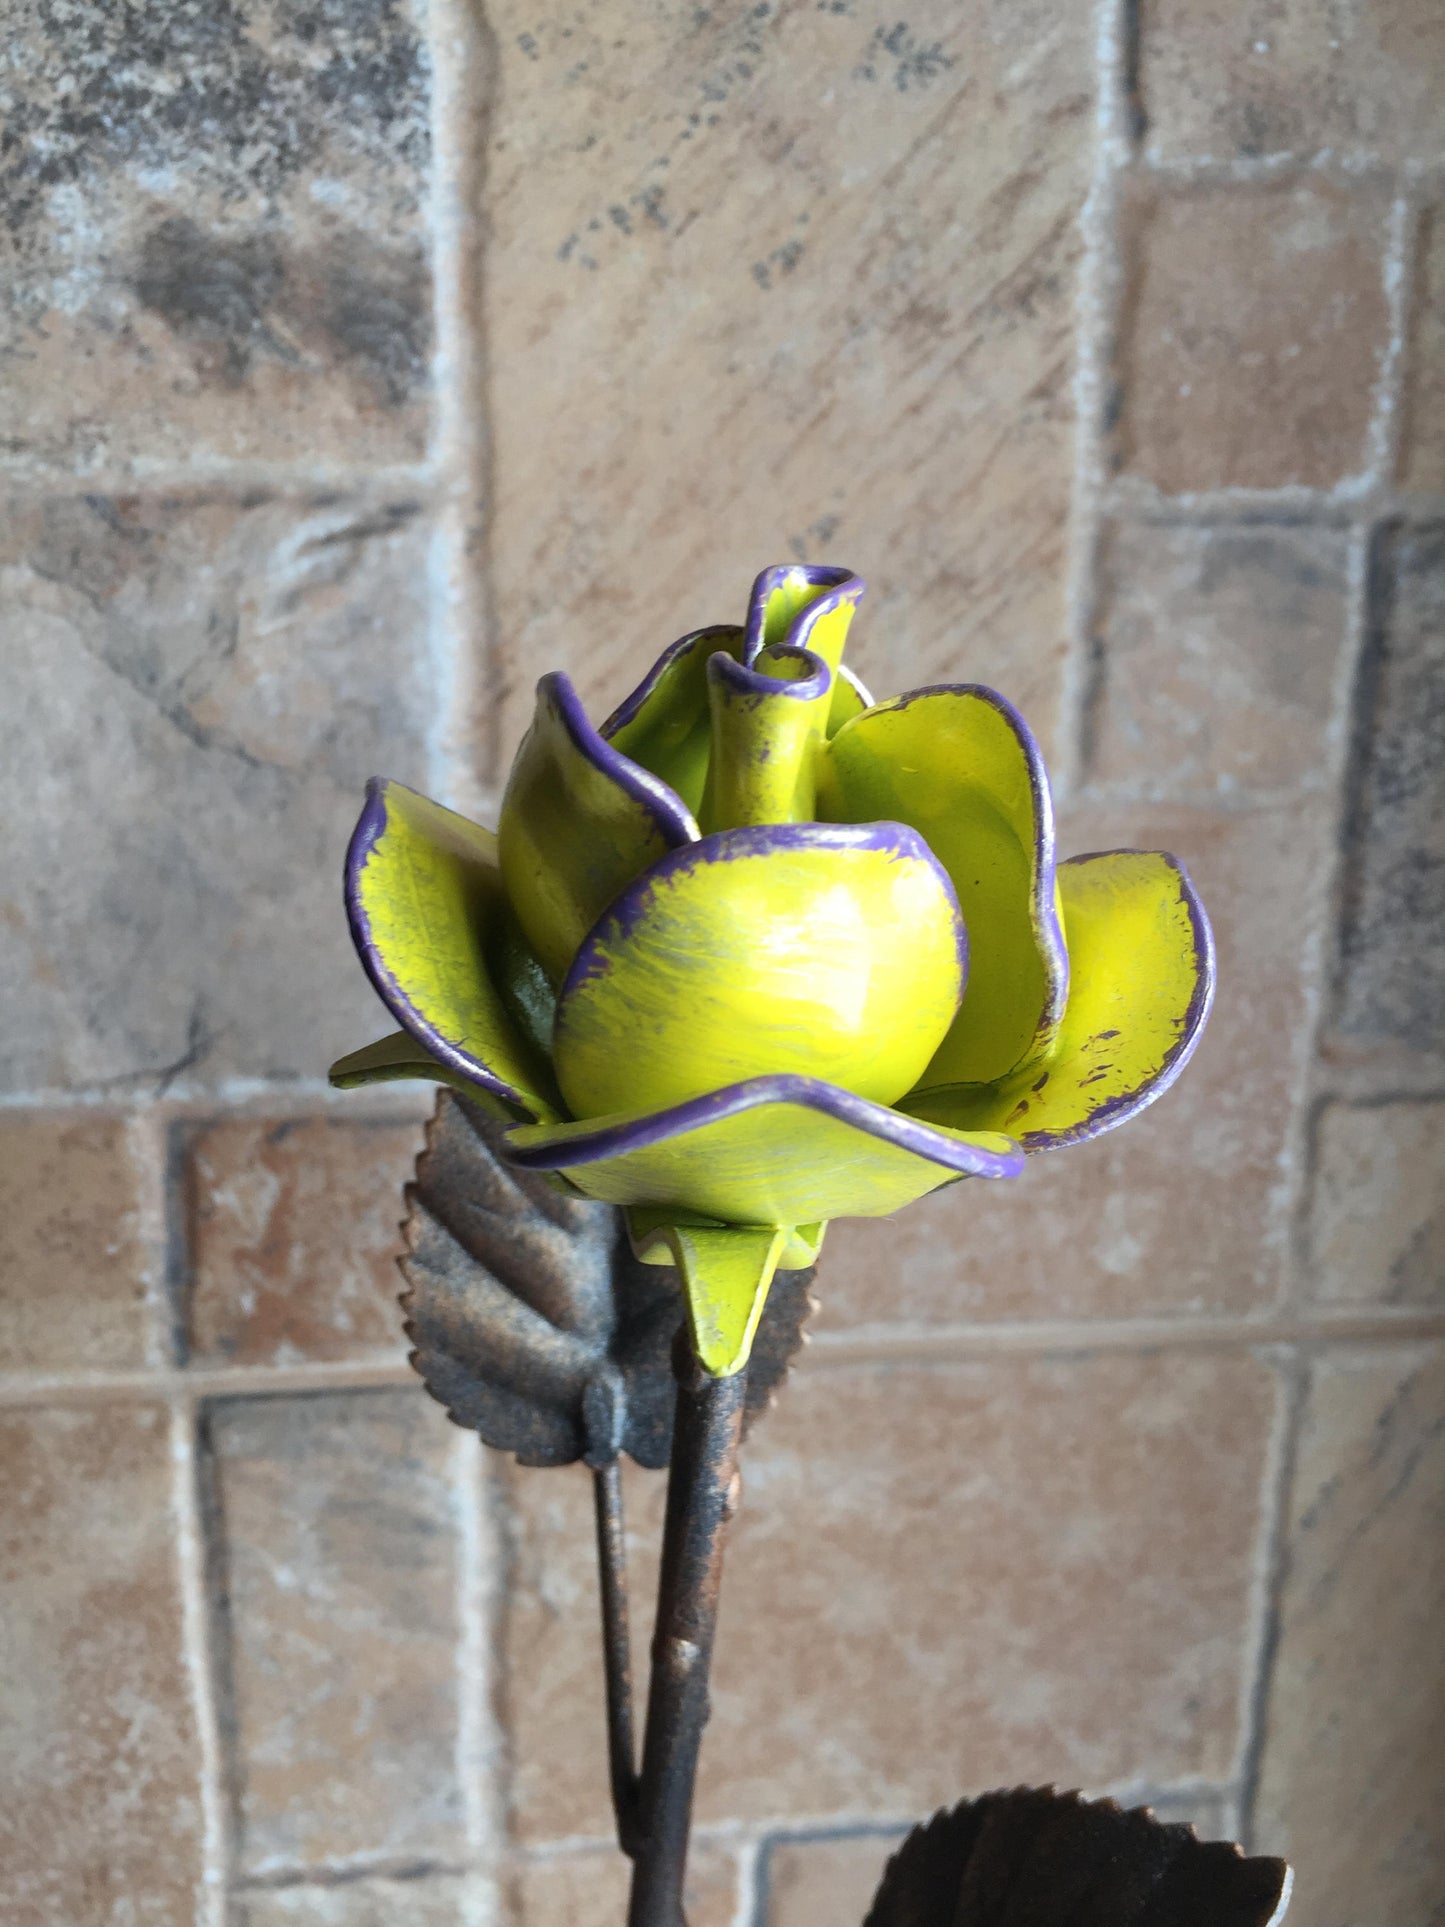 Iron rose in a vase, 6th anniversary gift, iron gifts for her,iron anniversary,hand forged rose,metal sculpture,metal rose,iron gift for her